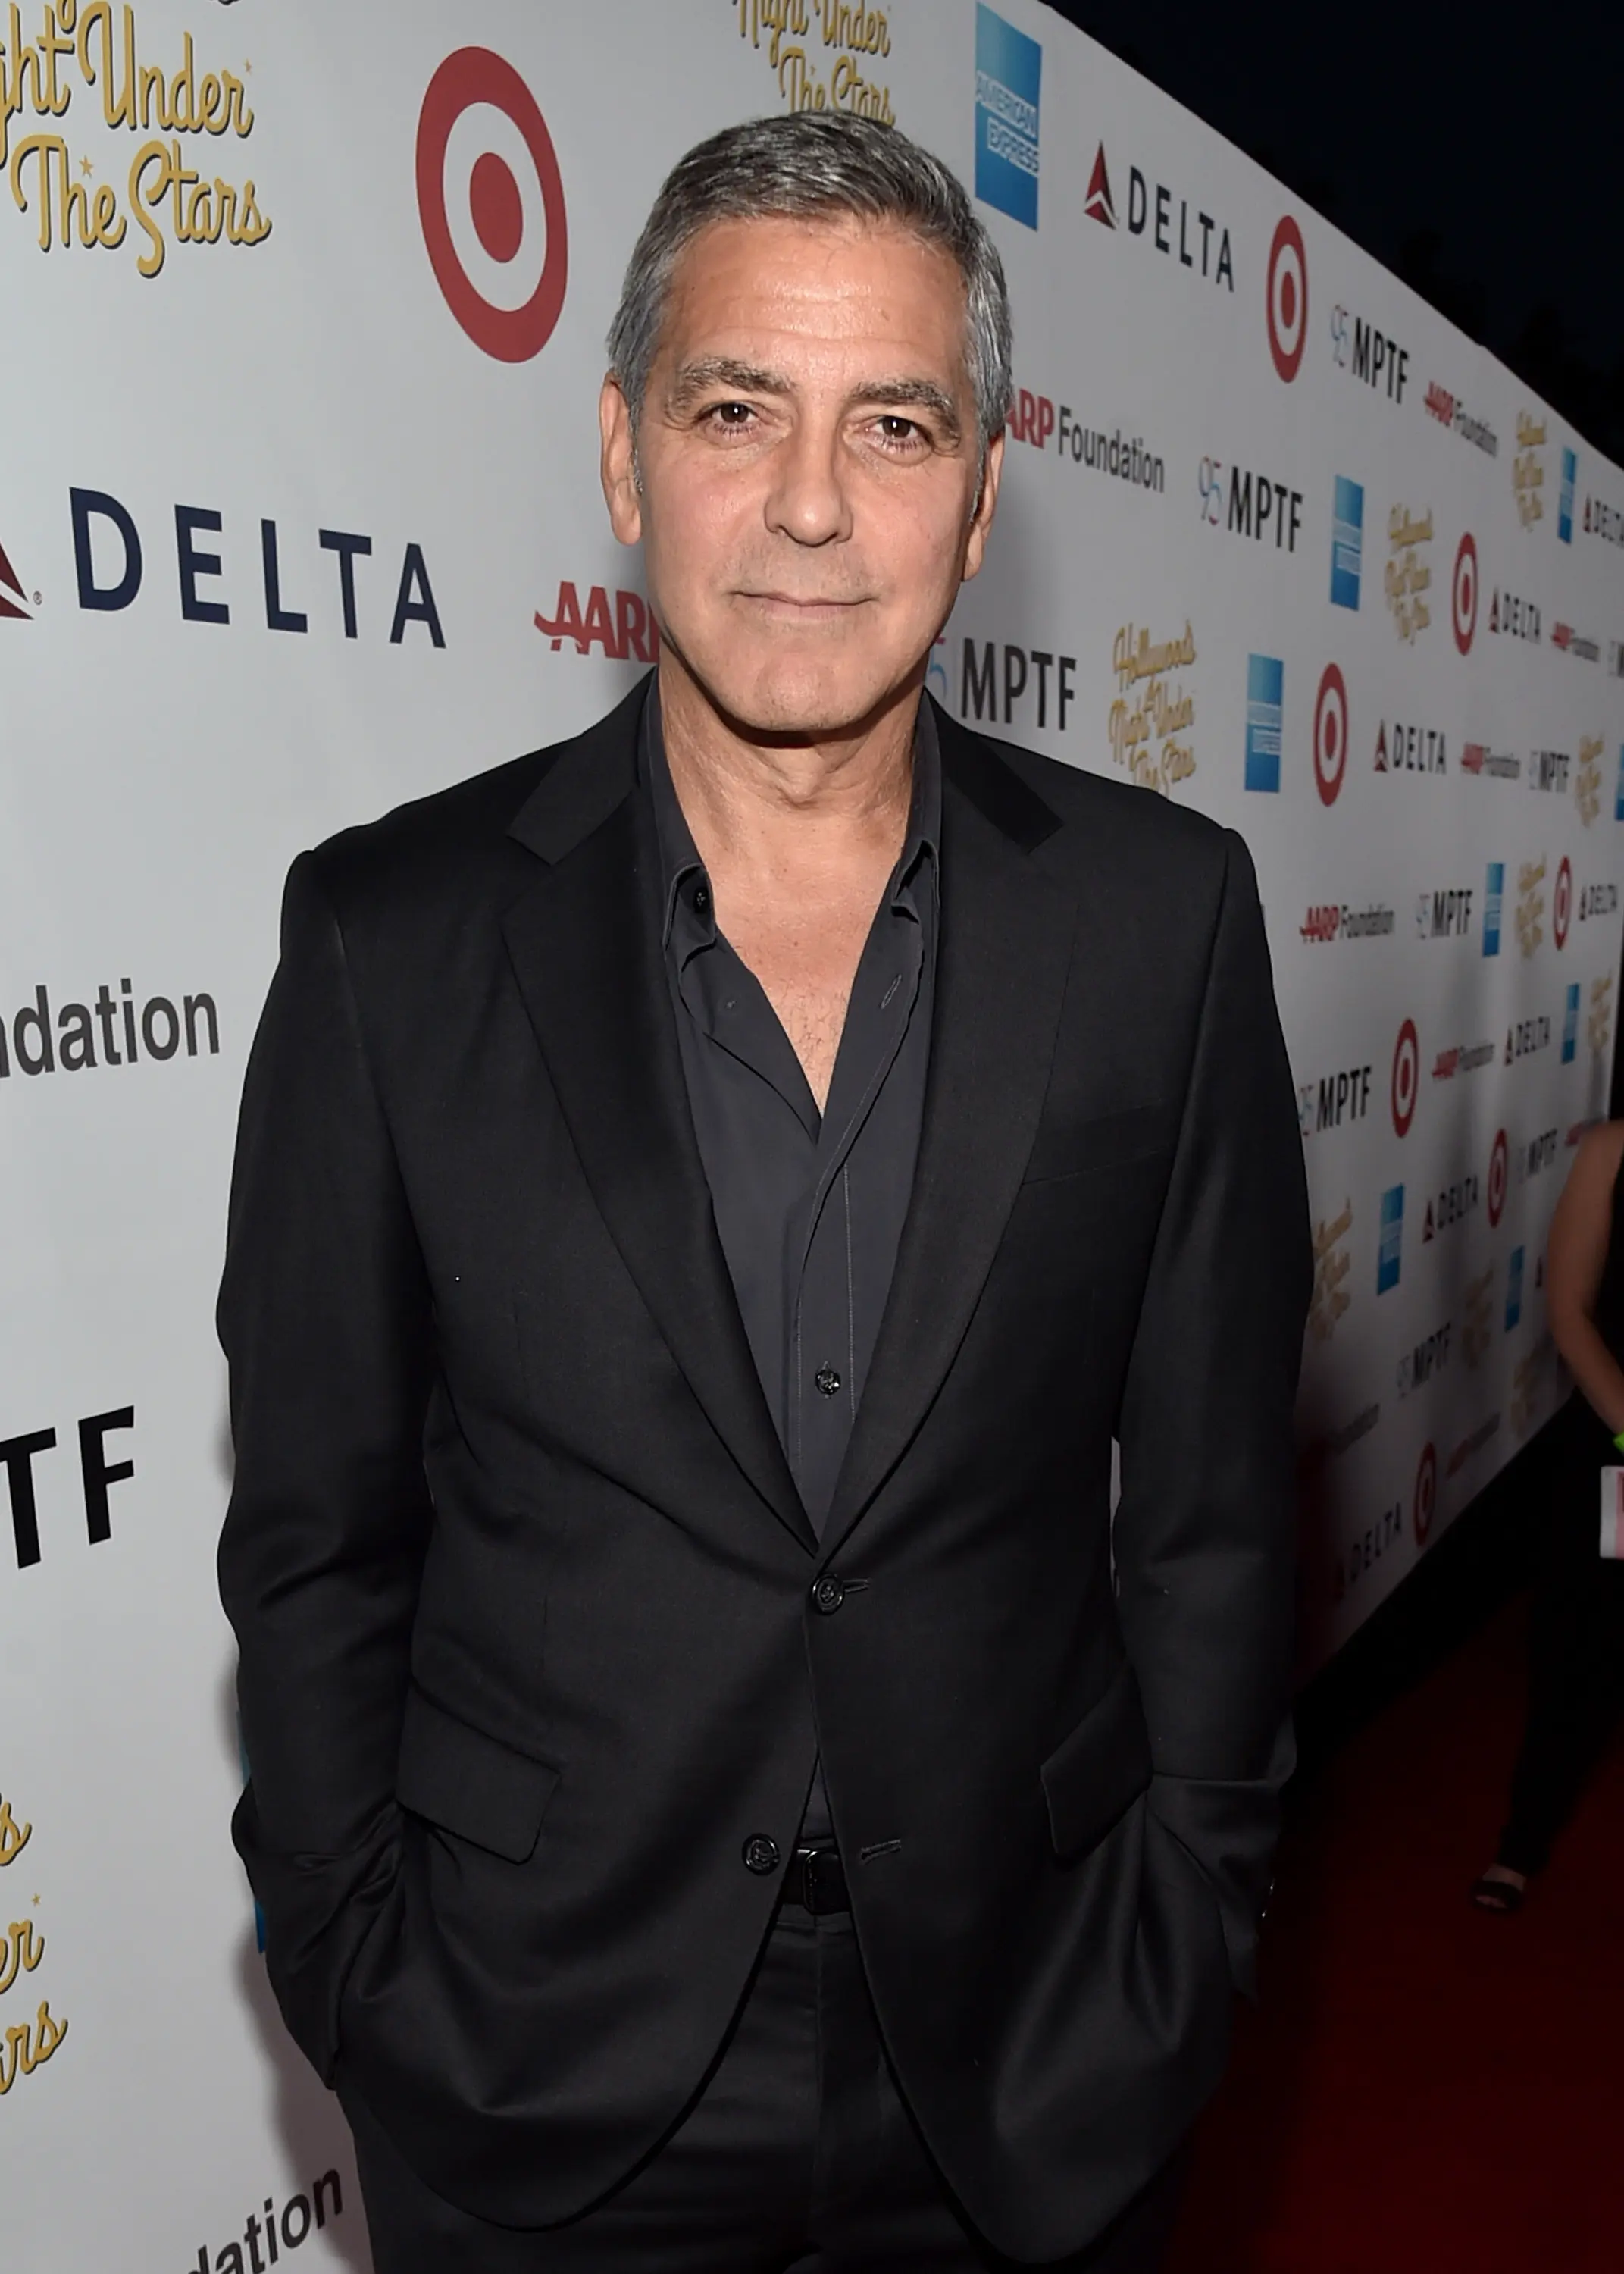 George Clooney. (AFP/Alberto E. Rodriguez / GETTY IMAGES NORTH AMERICA)